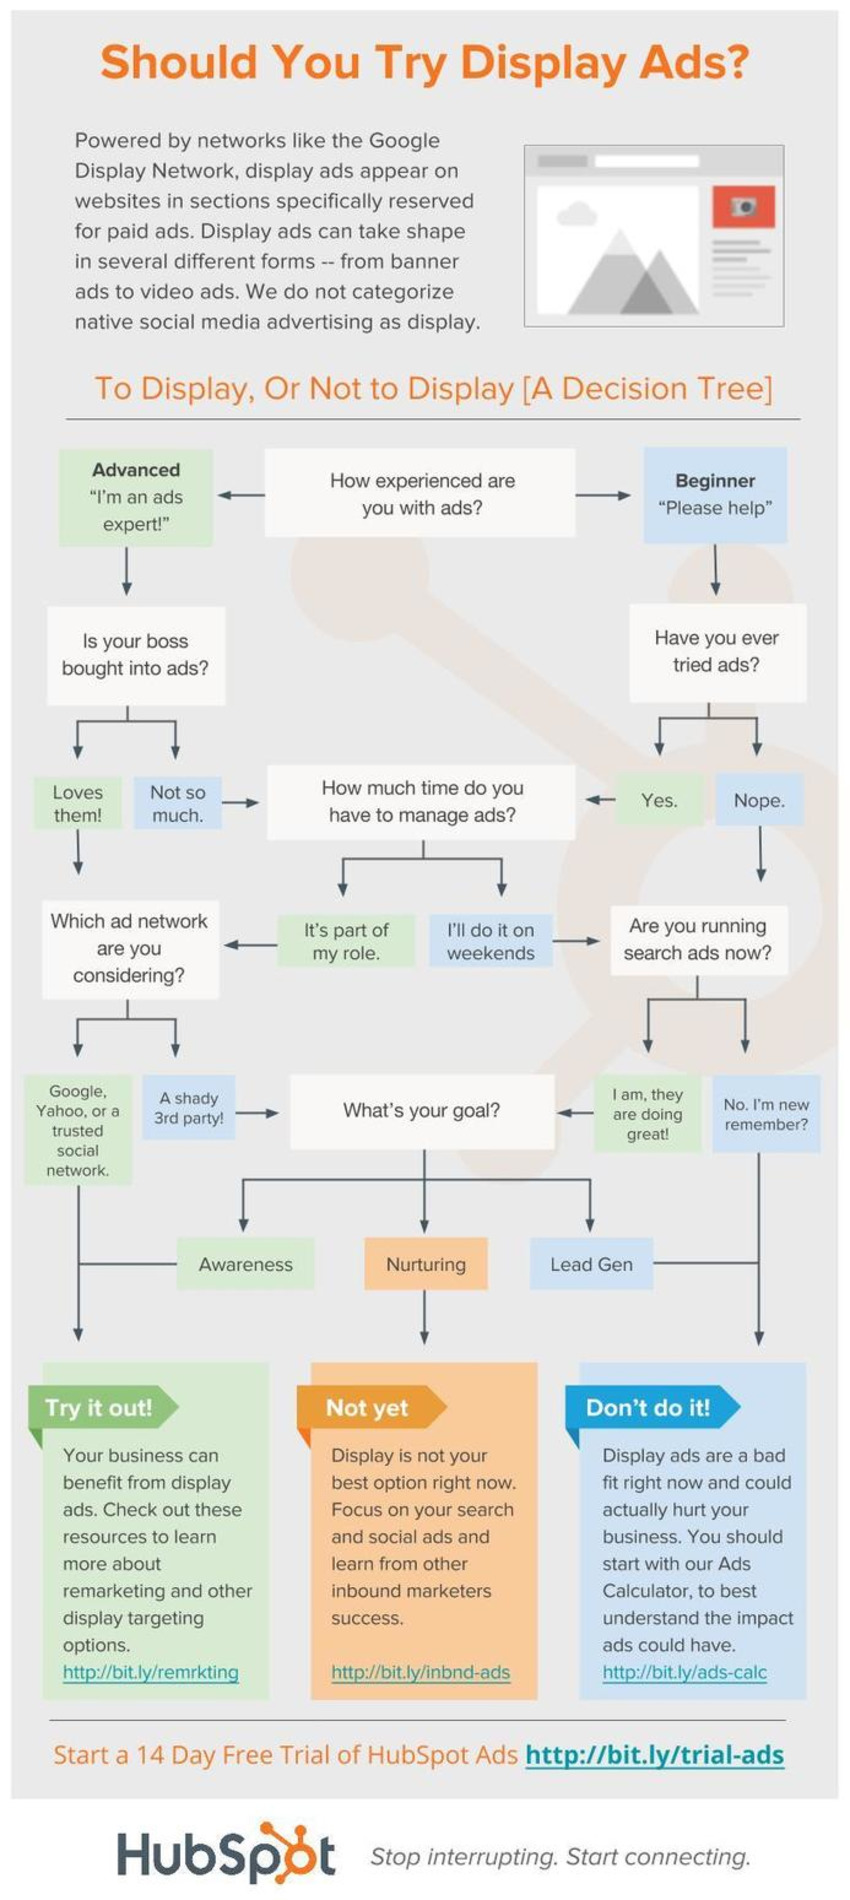 Are Display Ads Worth Your Time? [Flowchart] - HubSpot | The MarTech Digest | Scoop.it